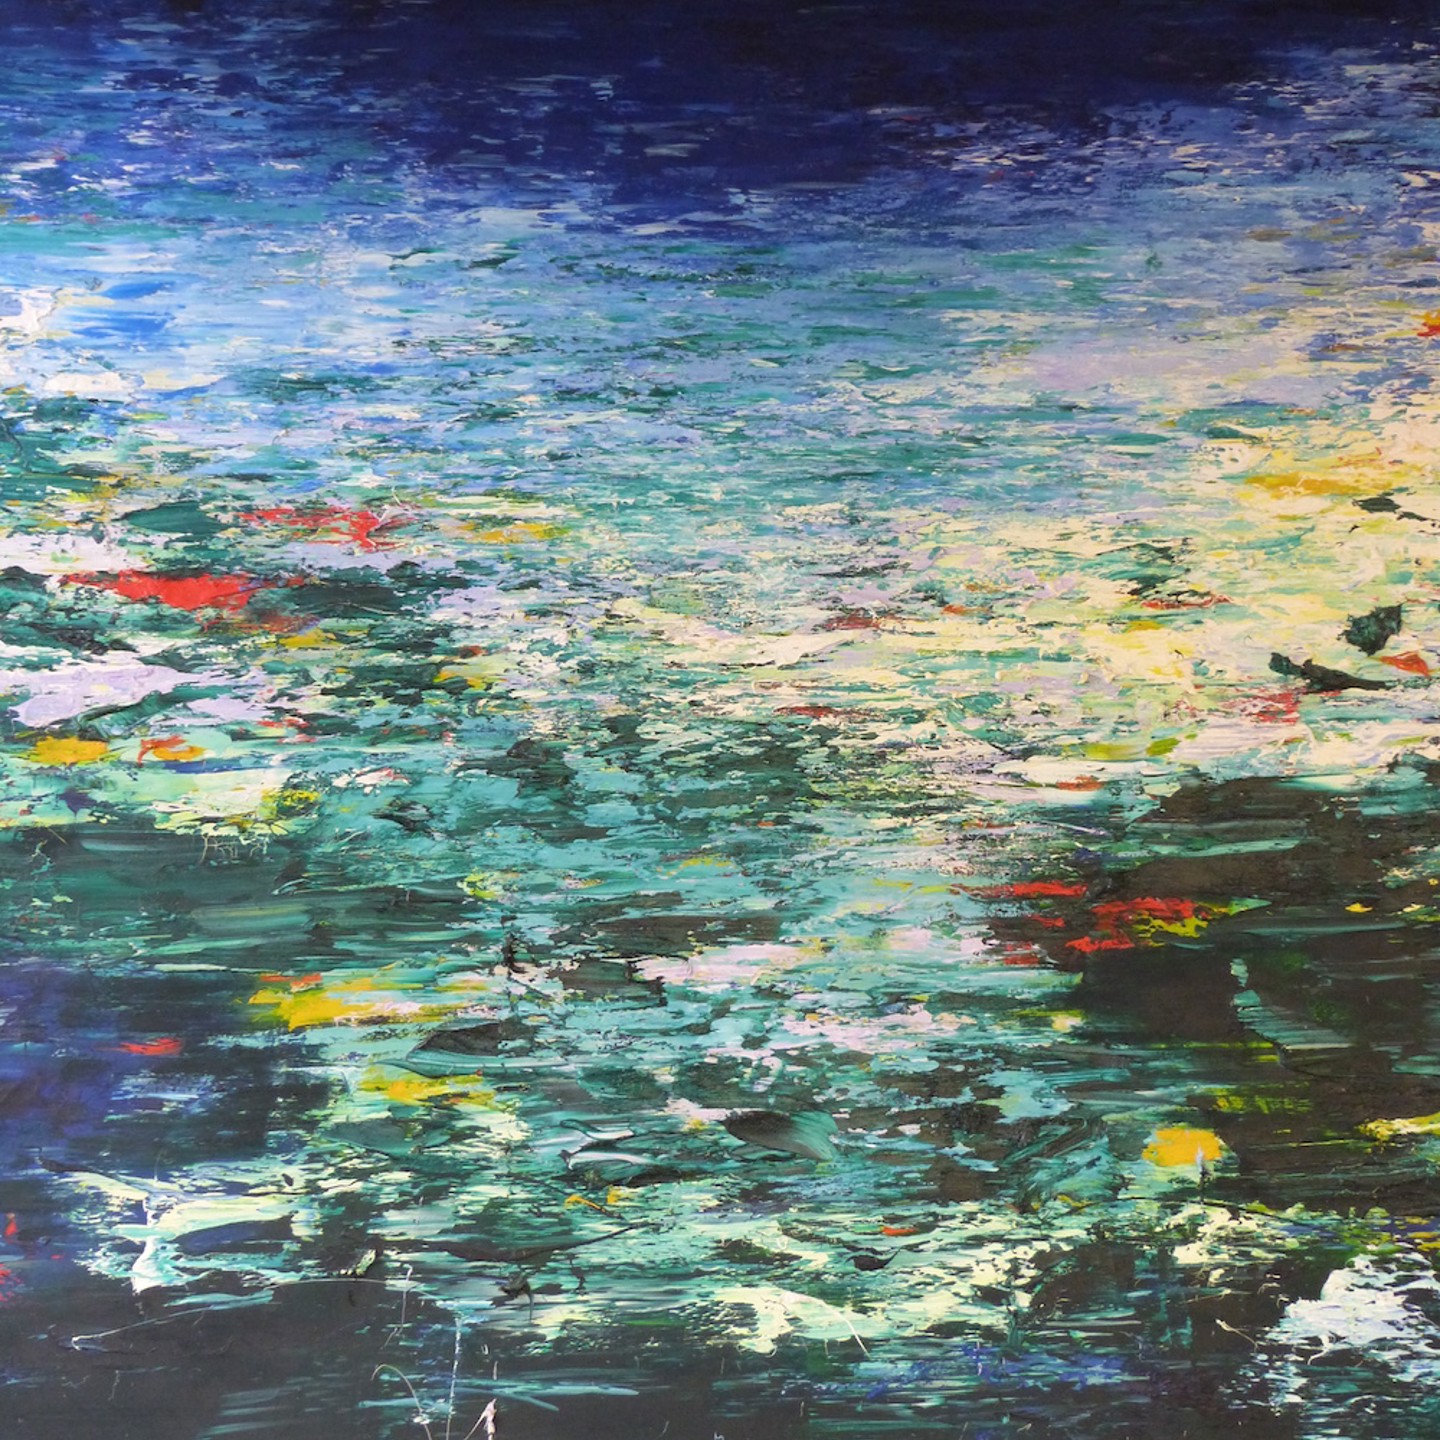 Martin Brewster Large Oil On Canvas Abstract Landscape Inscribed Verso 'Martin Brewster Lakeside 1990' Sold For Ś1100